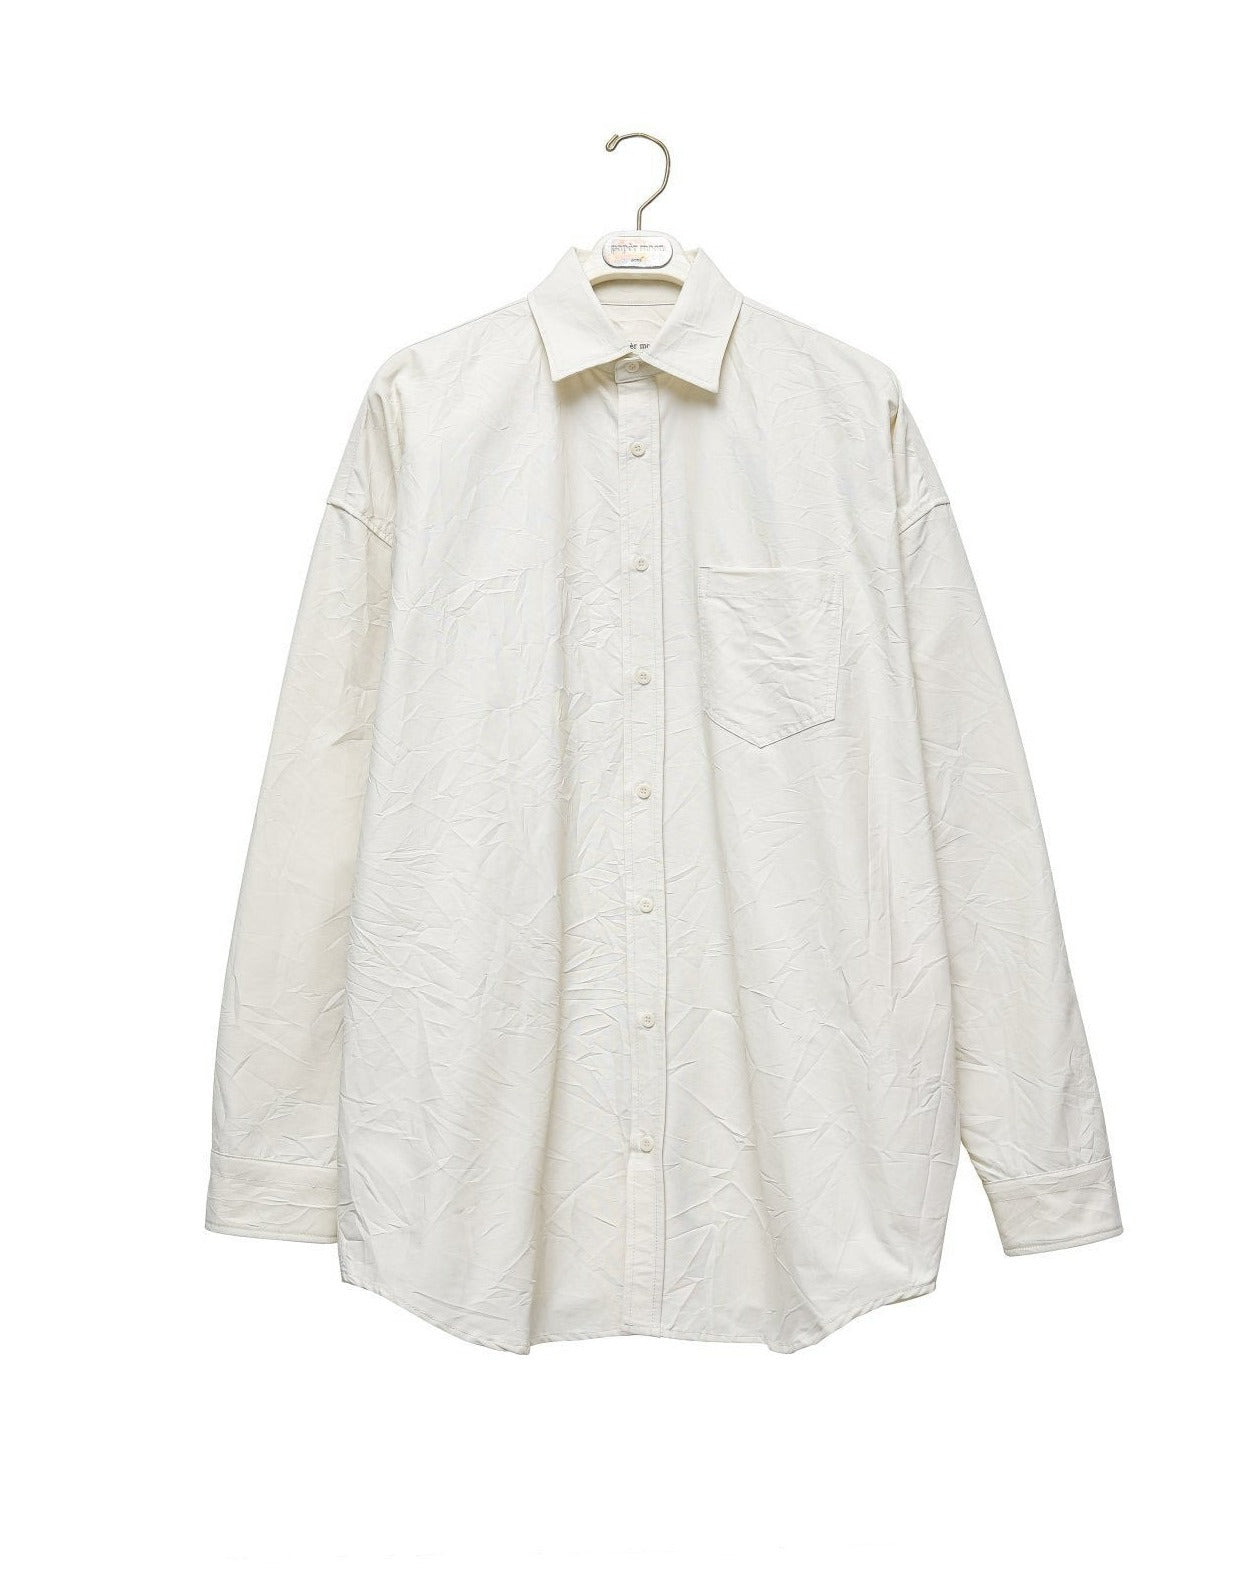 【PAPERMOON 페이퍼 문】SS / Wrinkle Cotton Fabric Oversized Button Down Shirt